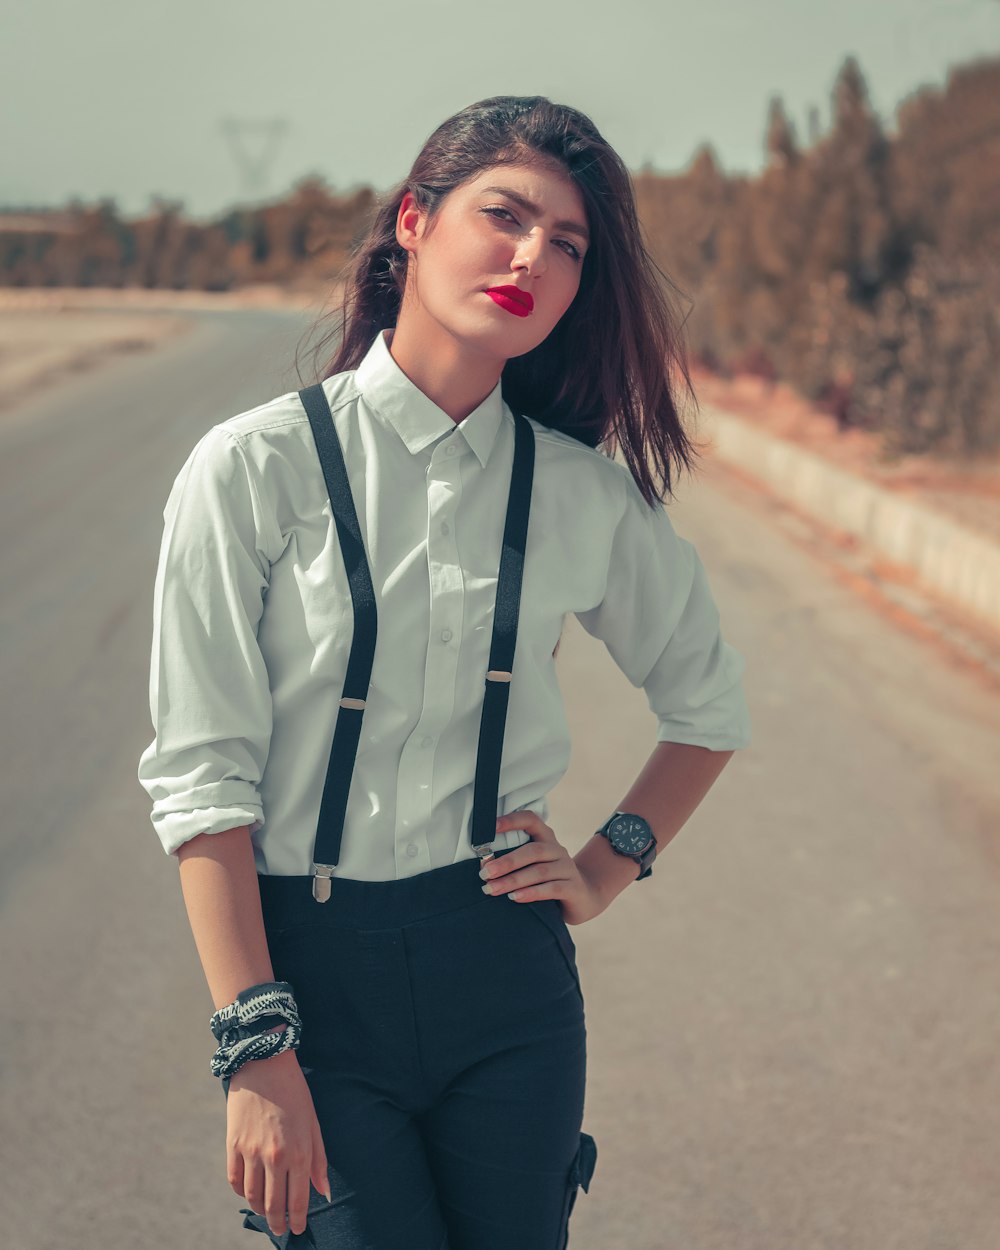 woman in white button up shirt and black pants standing on road during daytime